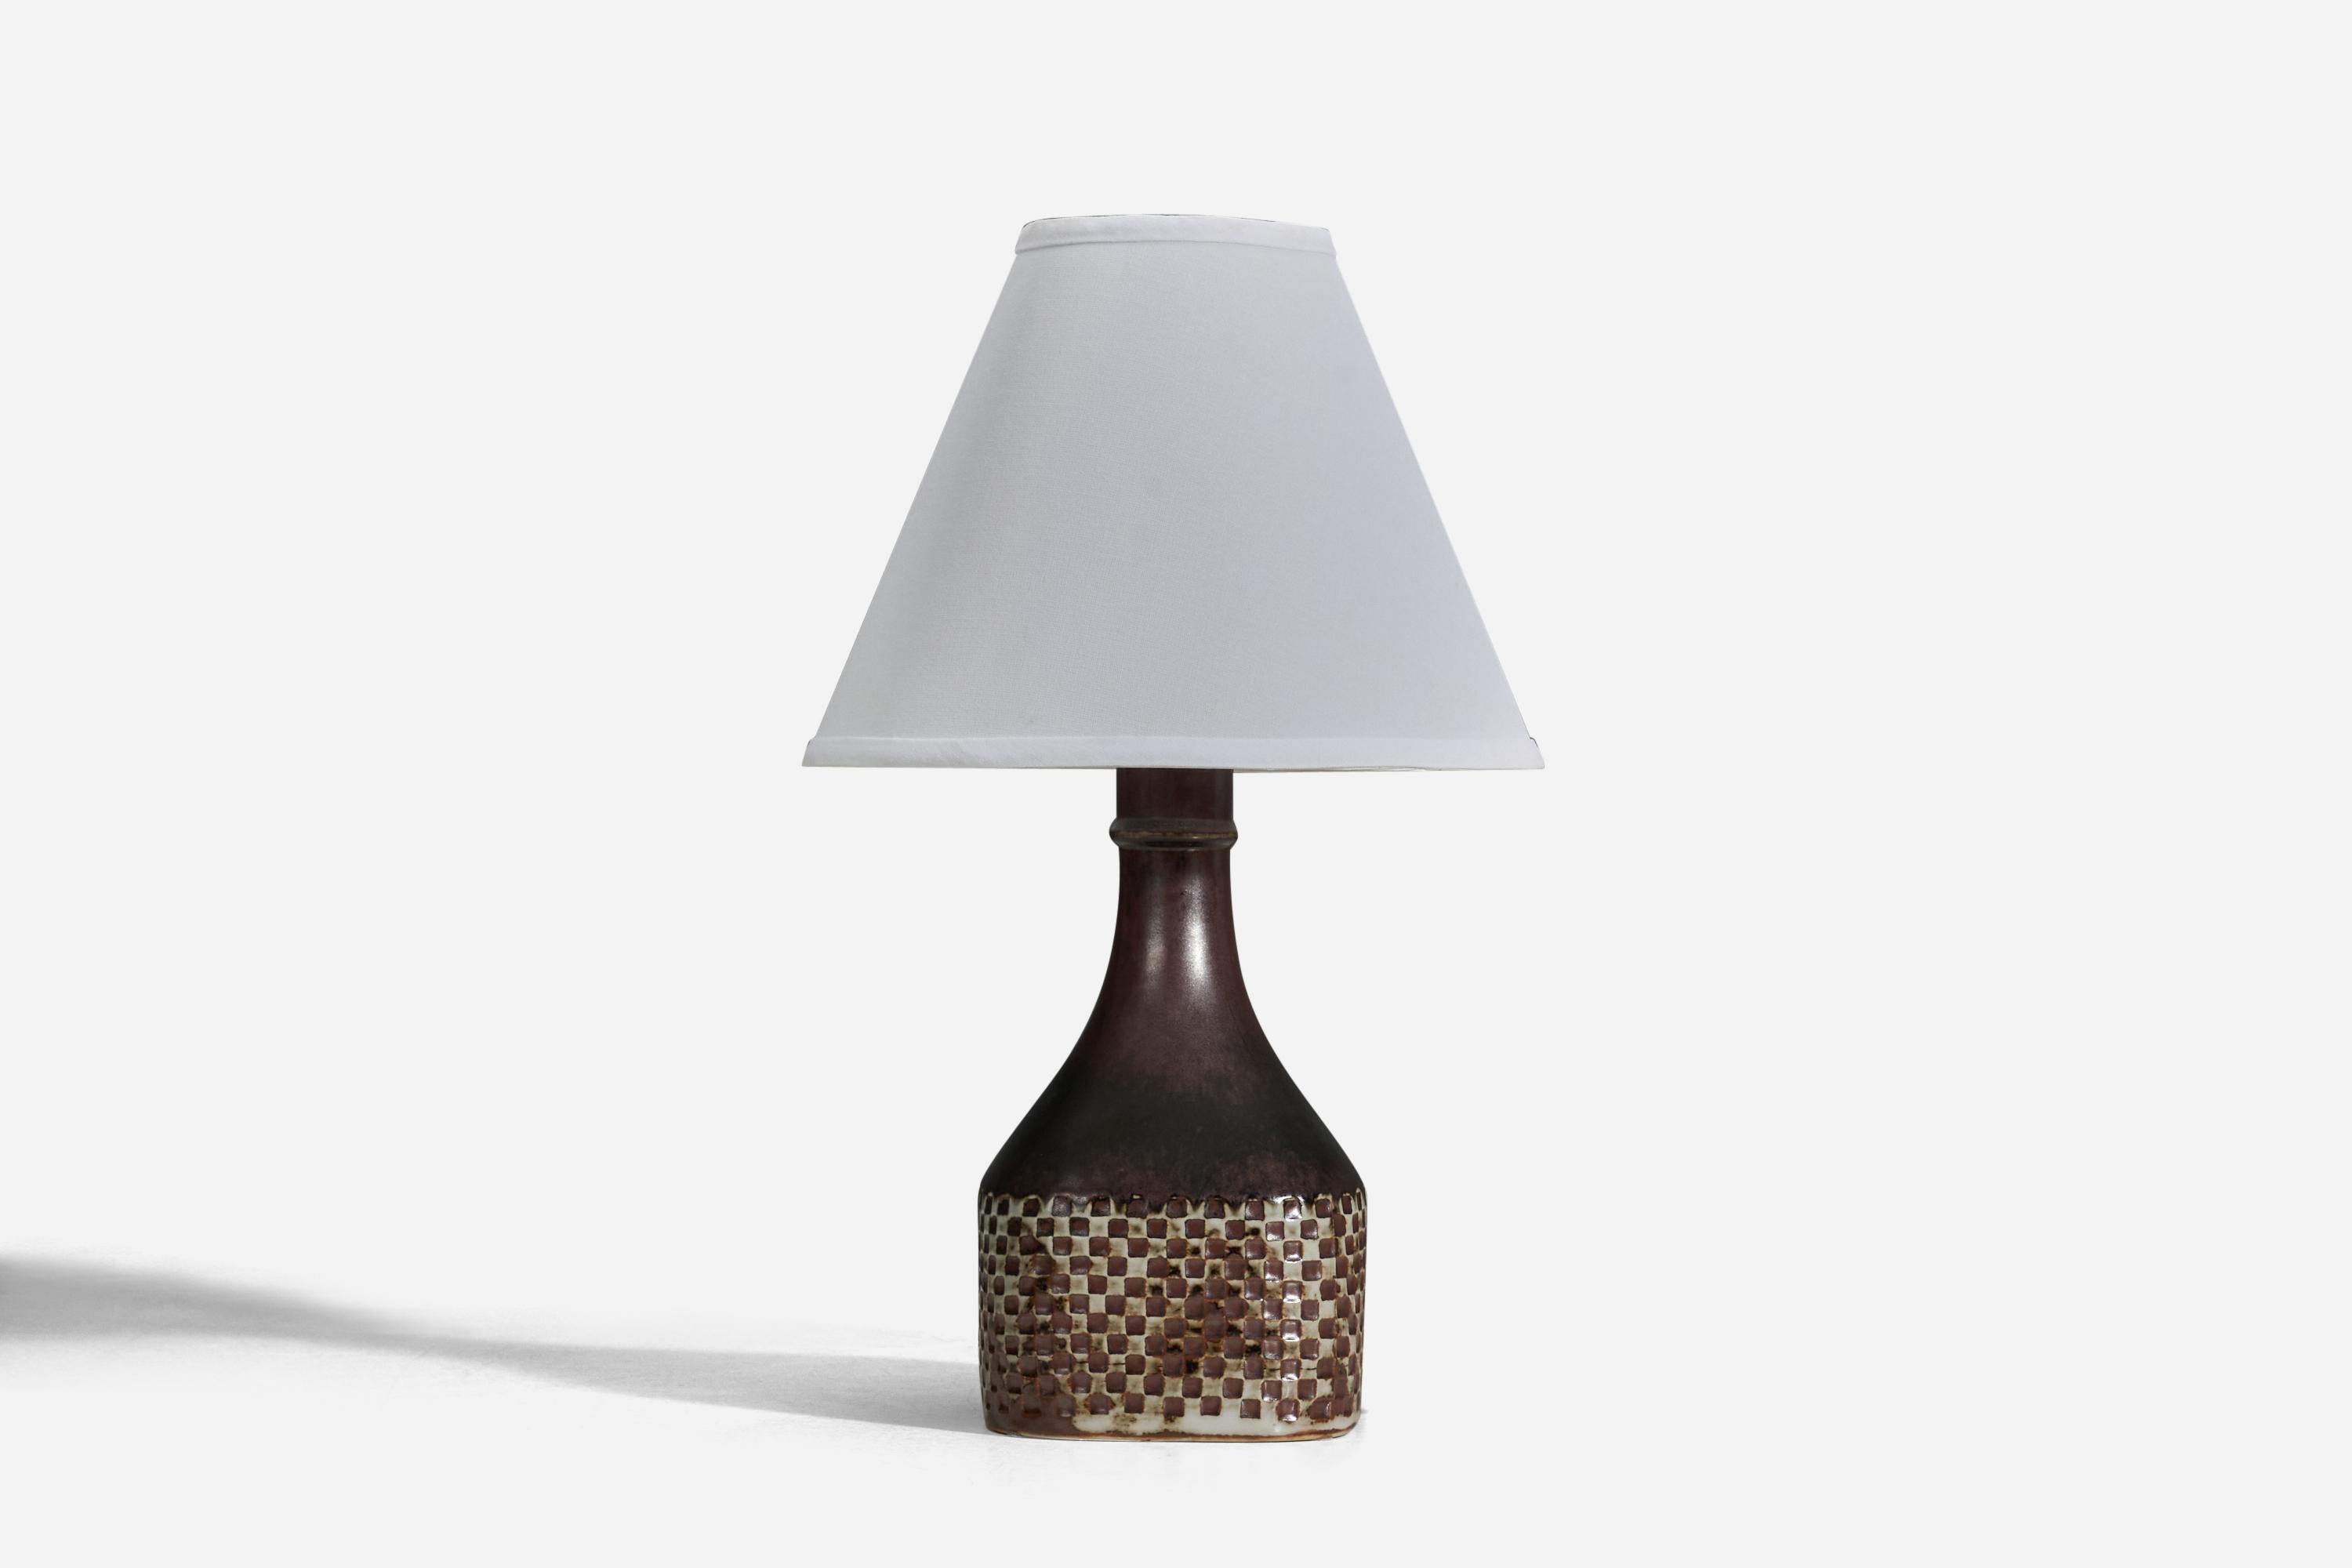 A brown glazed stoneware table lamp designed by Stig Lindberg and produced by Gustavsberg, Sweden, 1950s.

Sold without Lampshade
Dimensions of Lamp (inches) : 12 x 5.33 x 5.3 (Height x Width x Depth)
Dimensions of Lampshade (inches) : 4 x 10 x